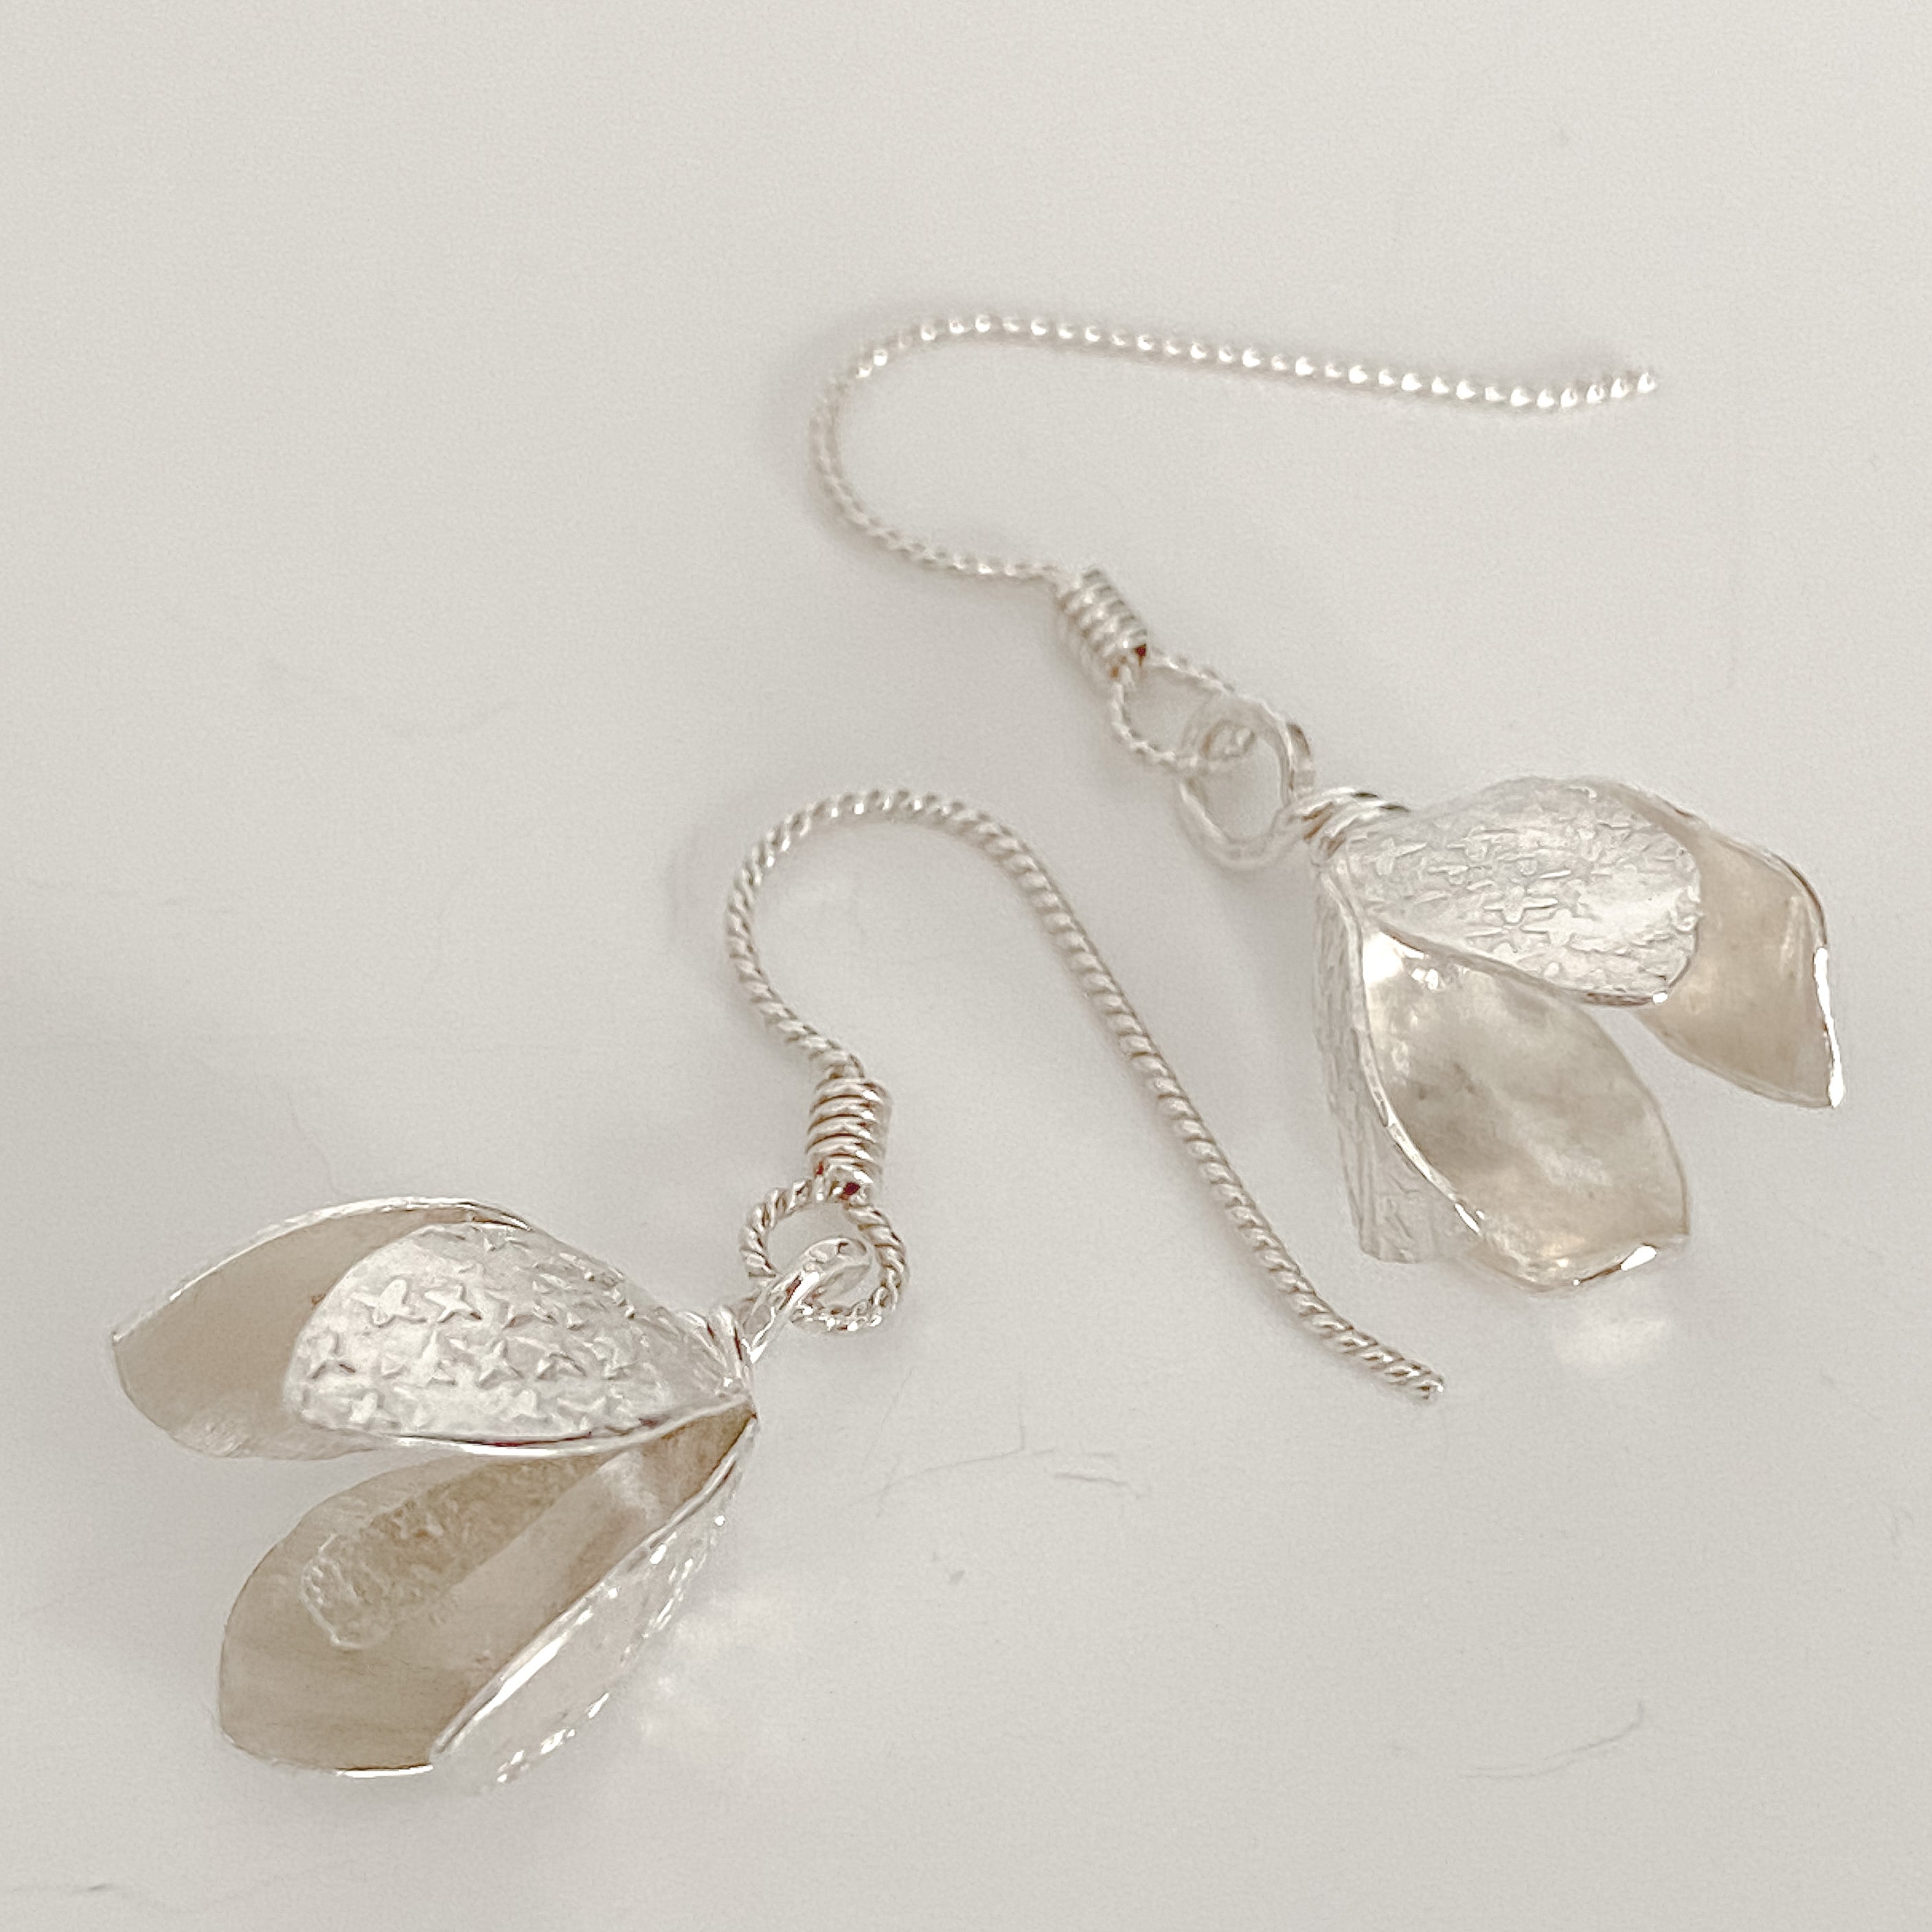 Genuine miniature flowers, set in sterling silver, available at natur